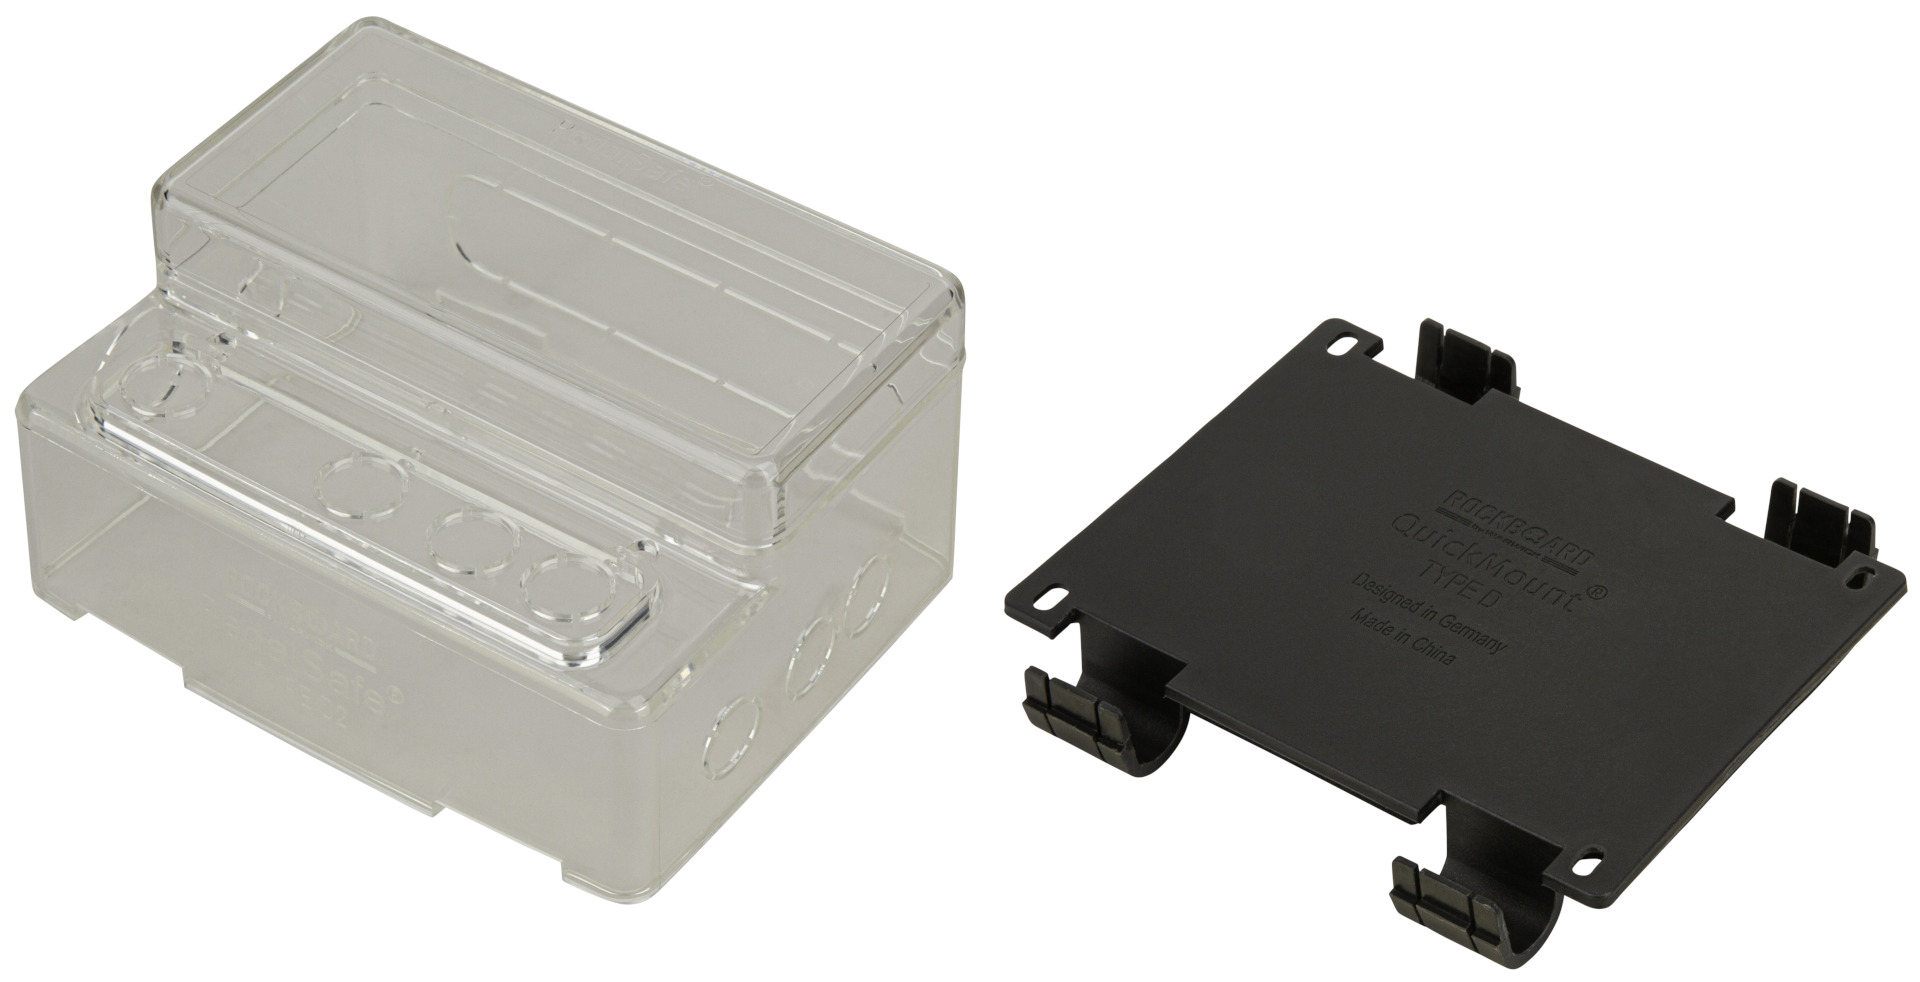 RockBoard PedalSafe Type D2 - Protective Cover And RockBoard Mounting Plate For Large Horizontal Pedals